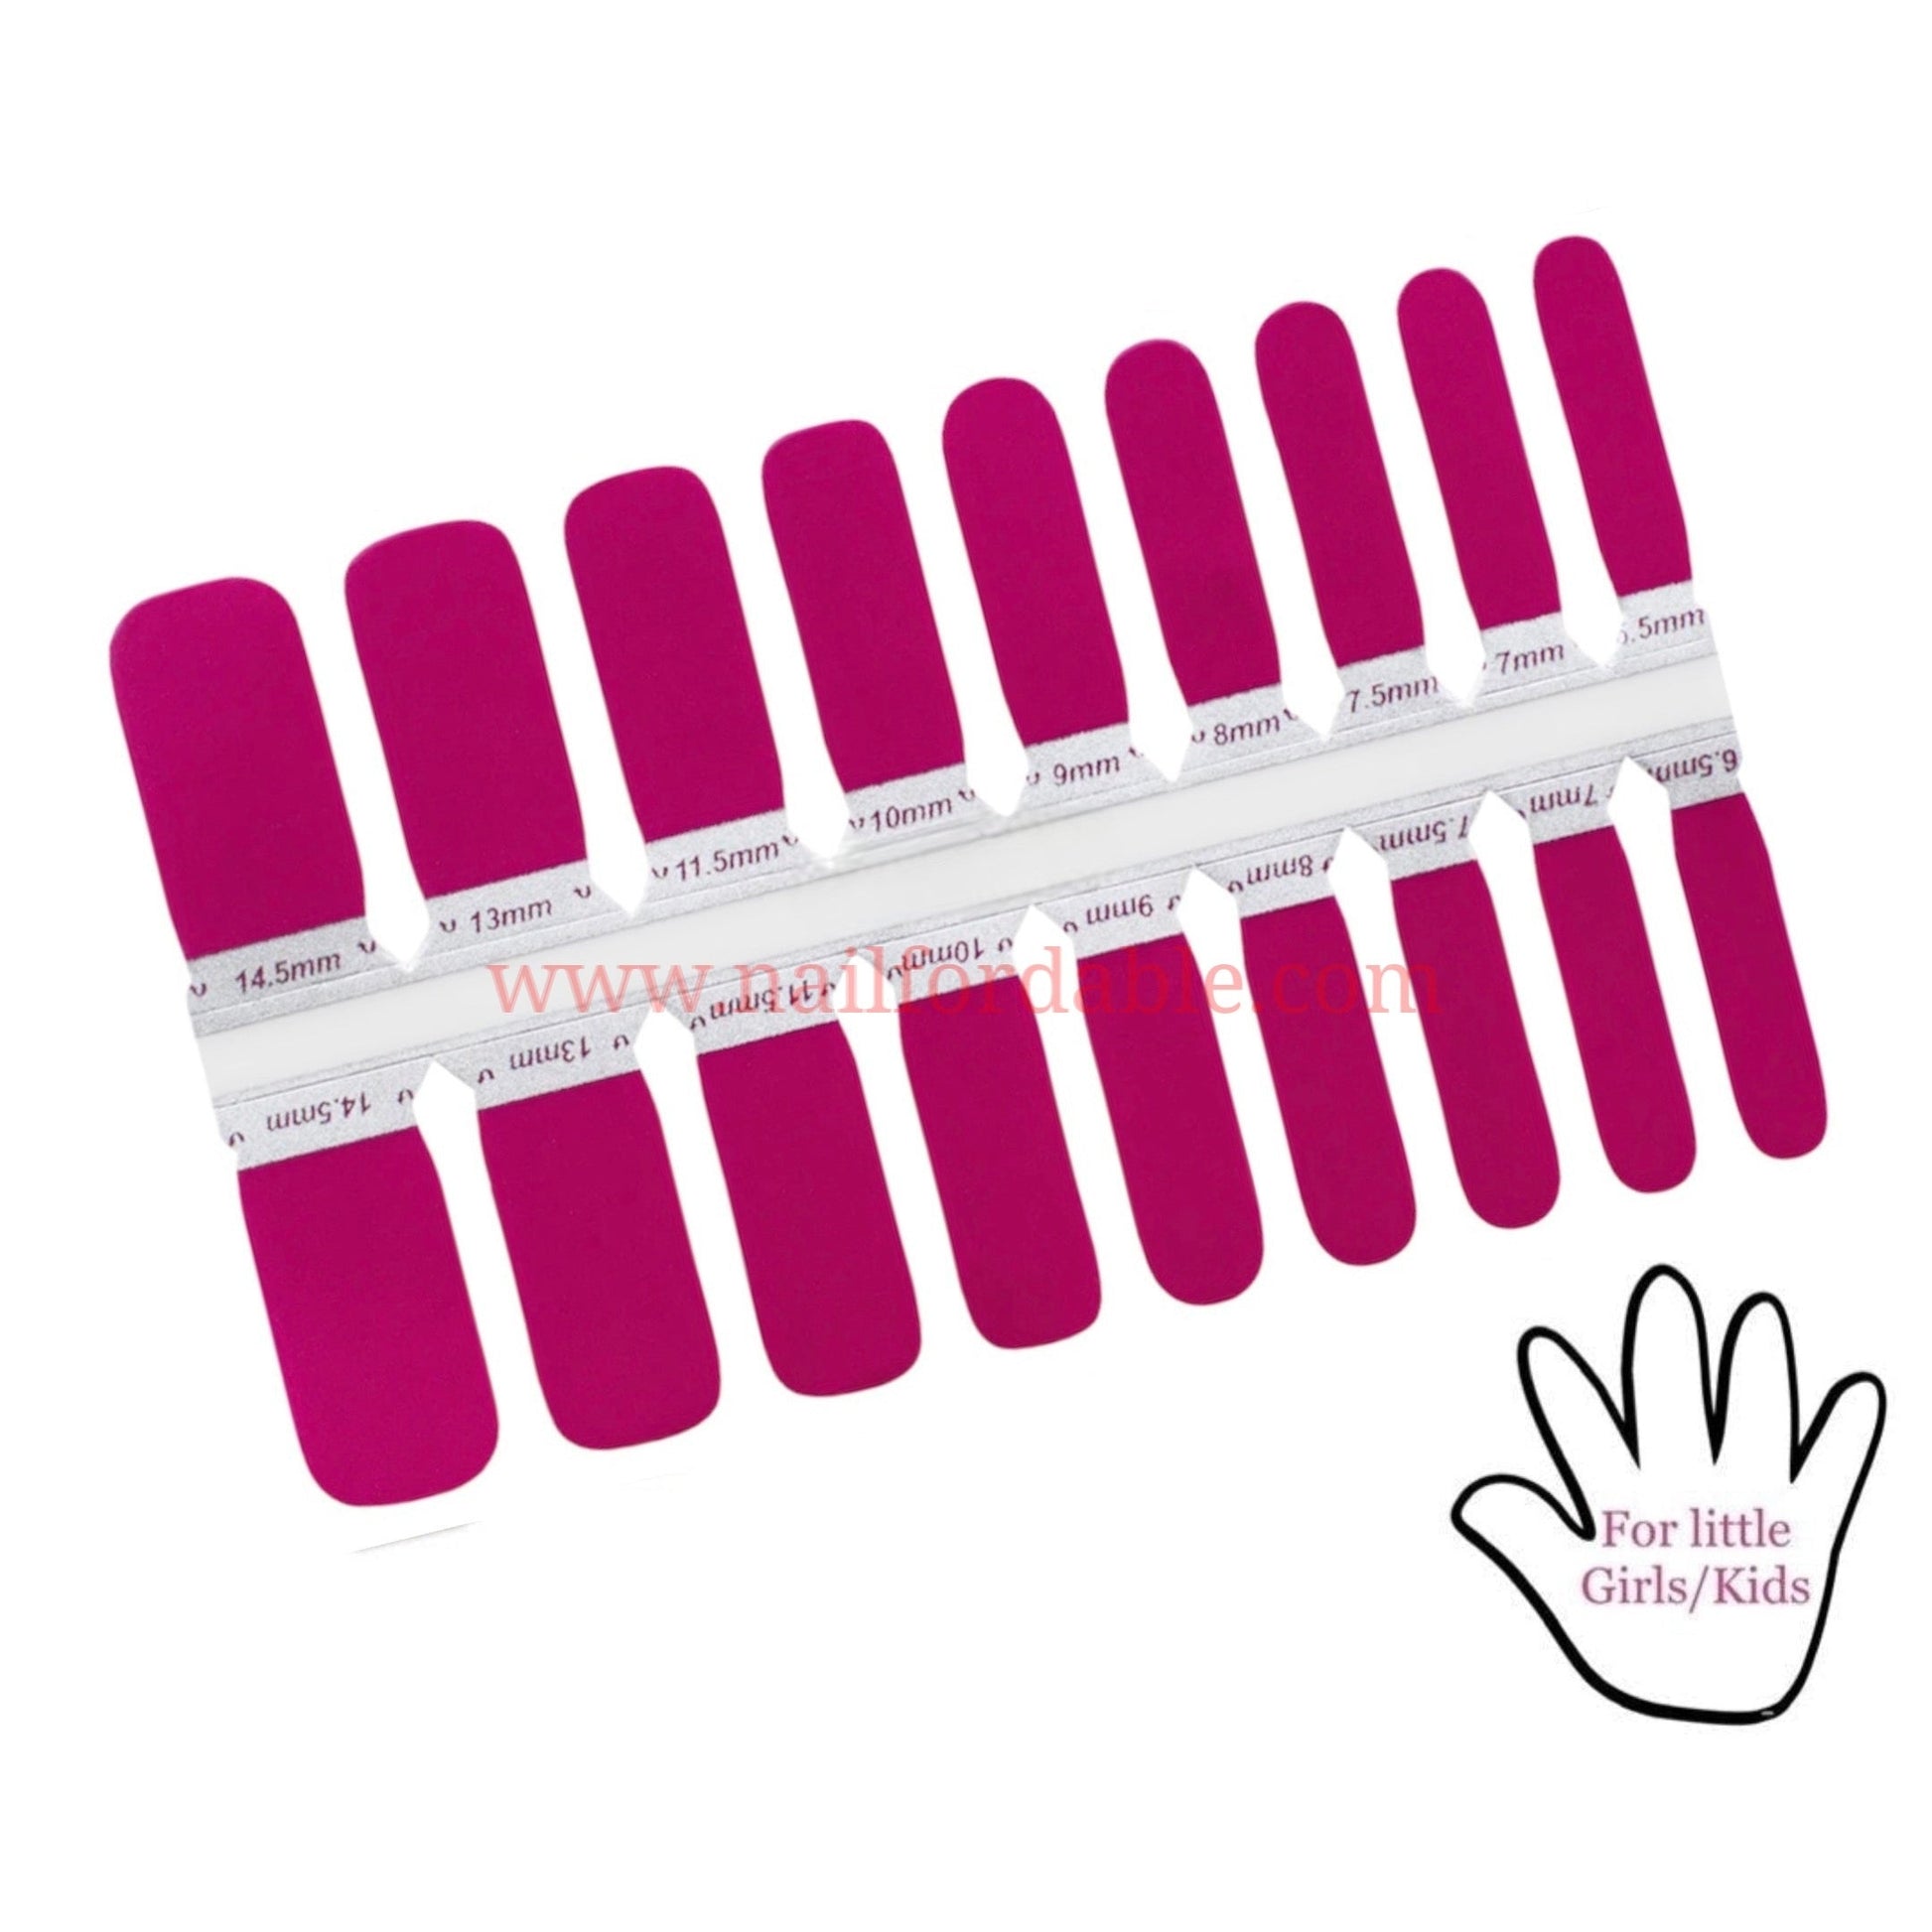 Magenta solid color Nail Wraps | Semi Cured Gel Wraps | Gel Nail Wraps |Nail Polish | Nail Stickers